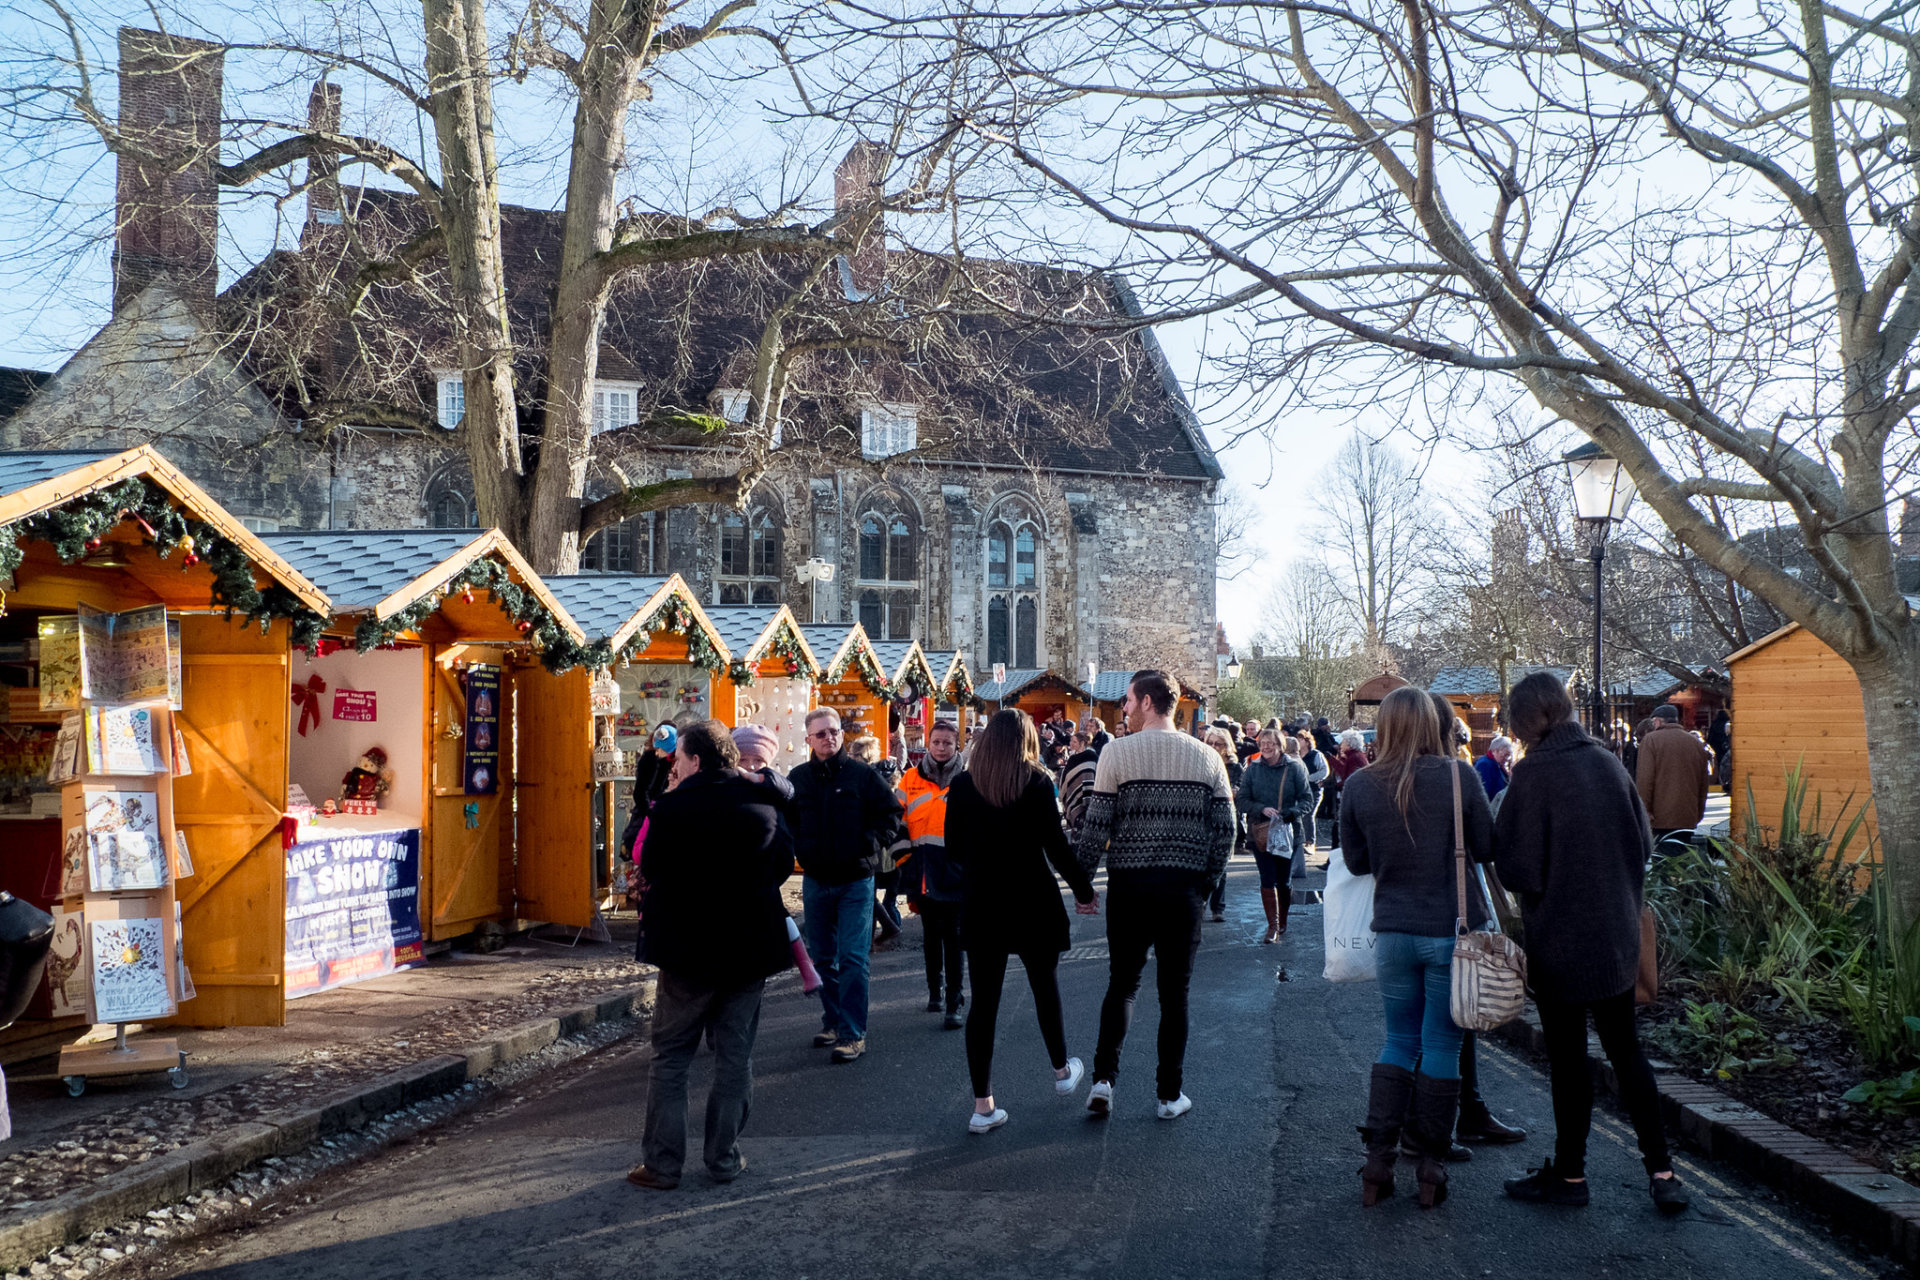 Winchester Cathedral Christmas Market